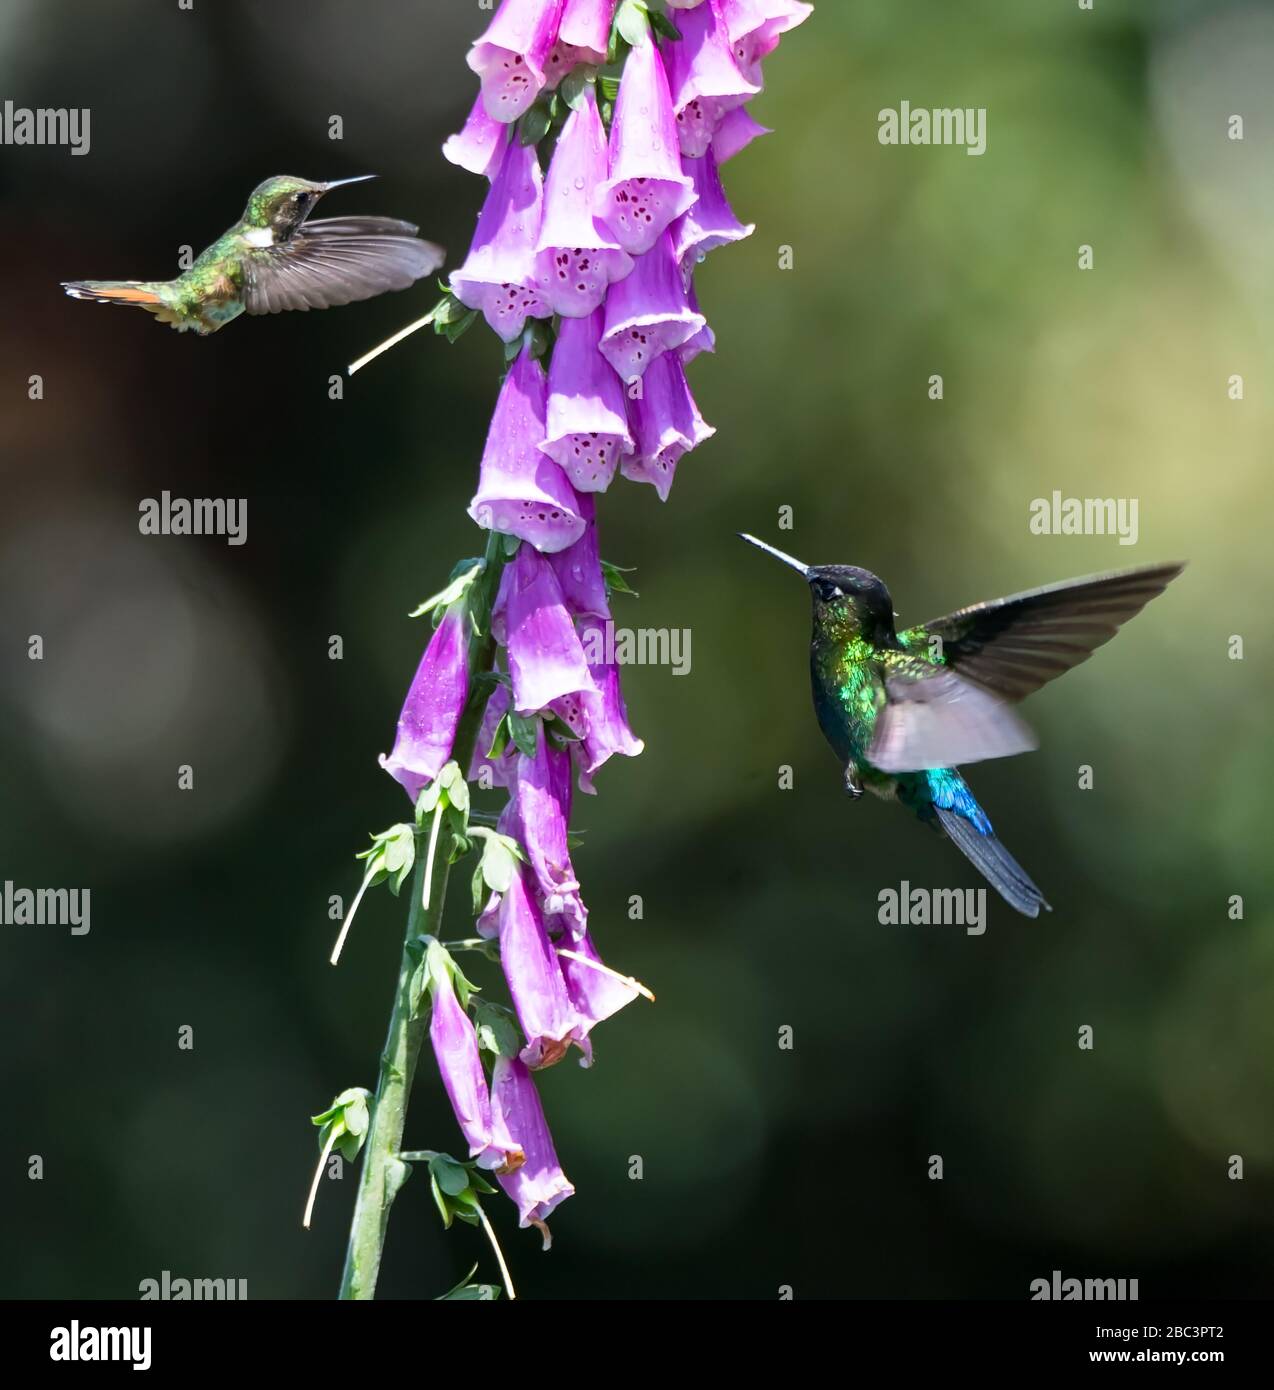 Pair of Fiery-throated hummingbird approaching blooms filled with nectar Stock Photo